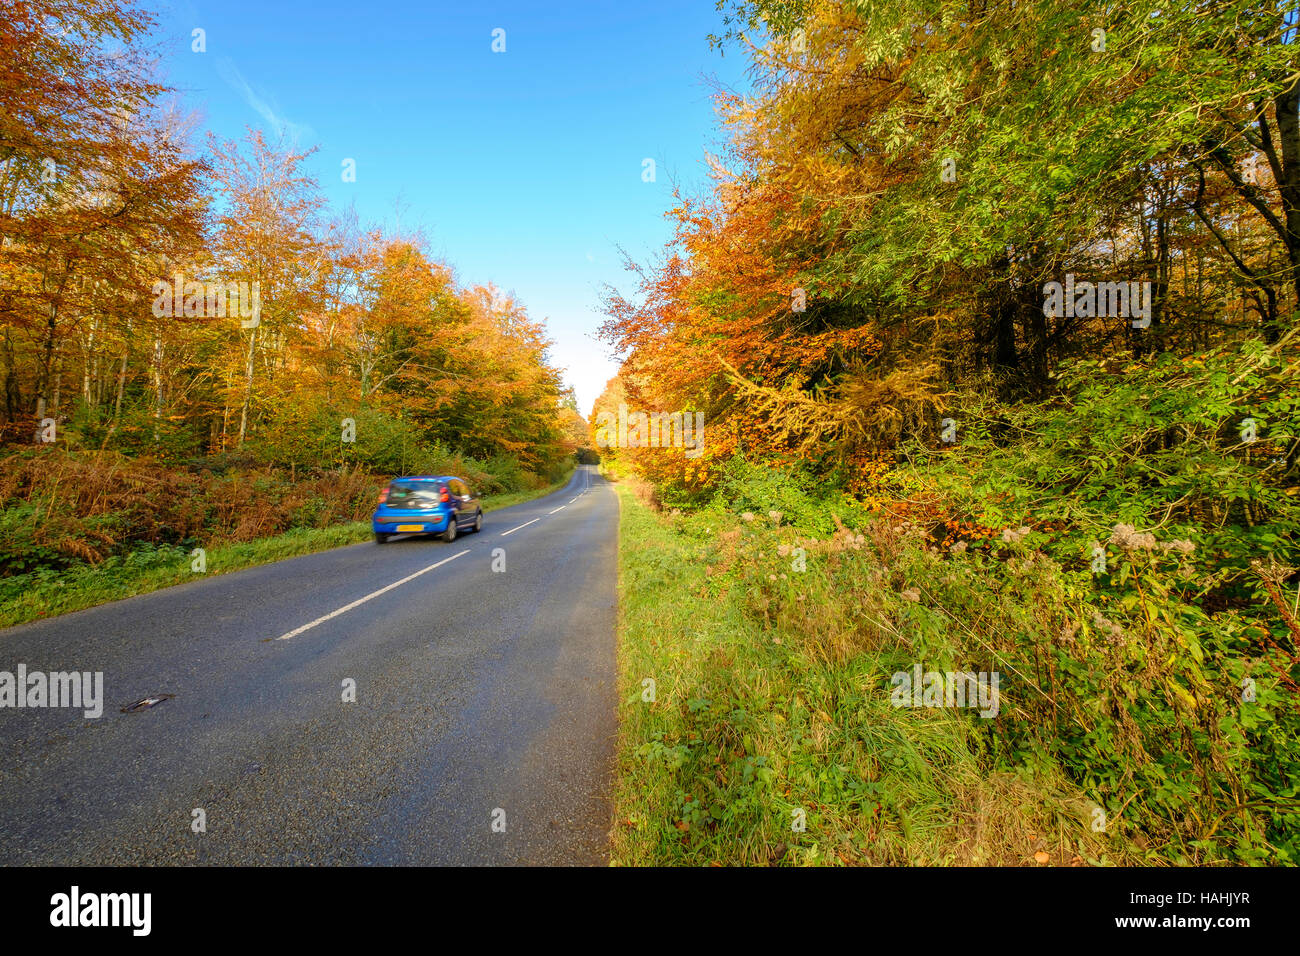 Country road in Hewelsfield Gloucestershire with trees in autumn foliage and blue car on road.Hewlsfield is close to Wye Valley Stock Photo